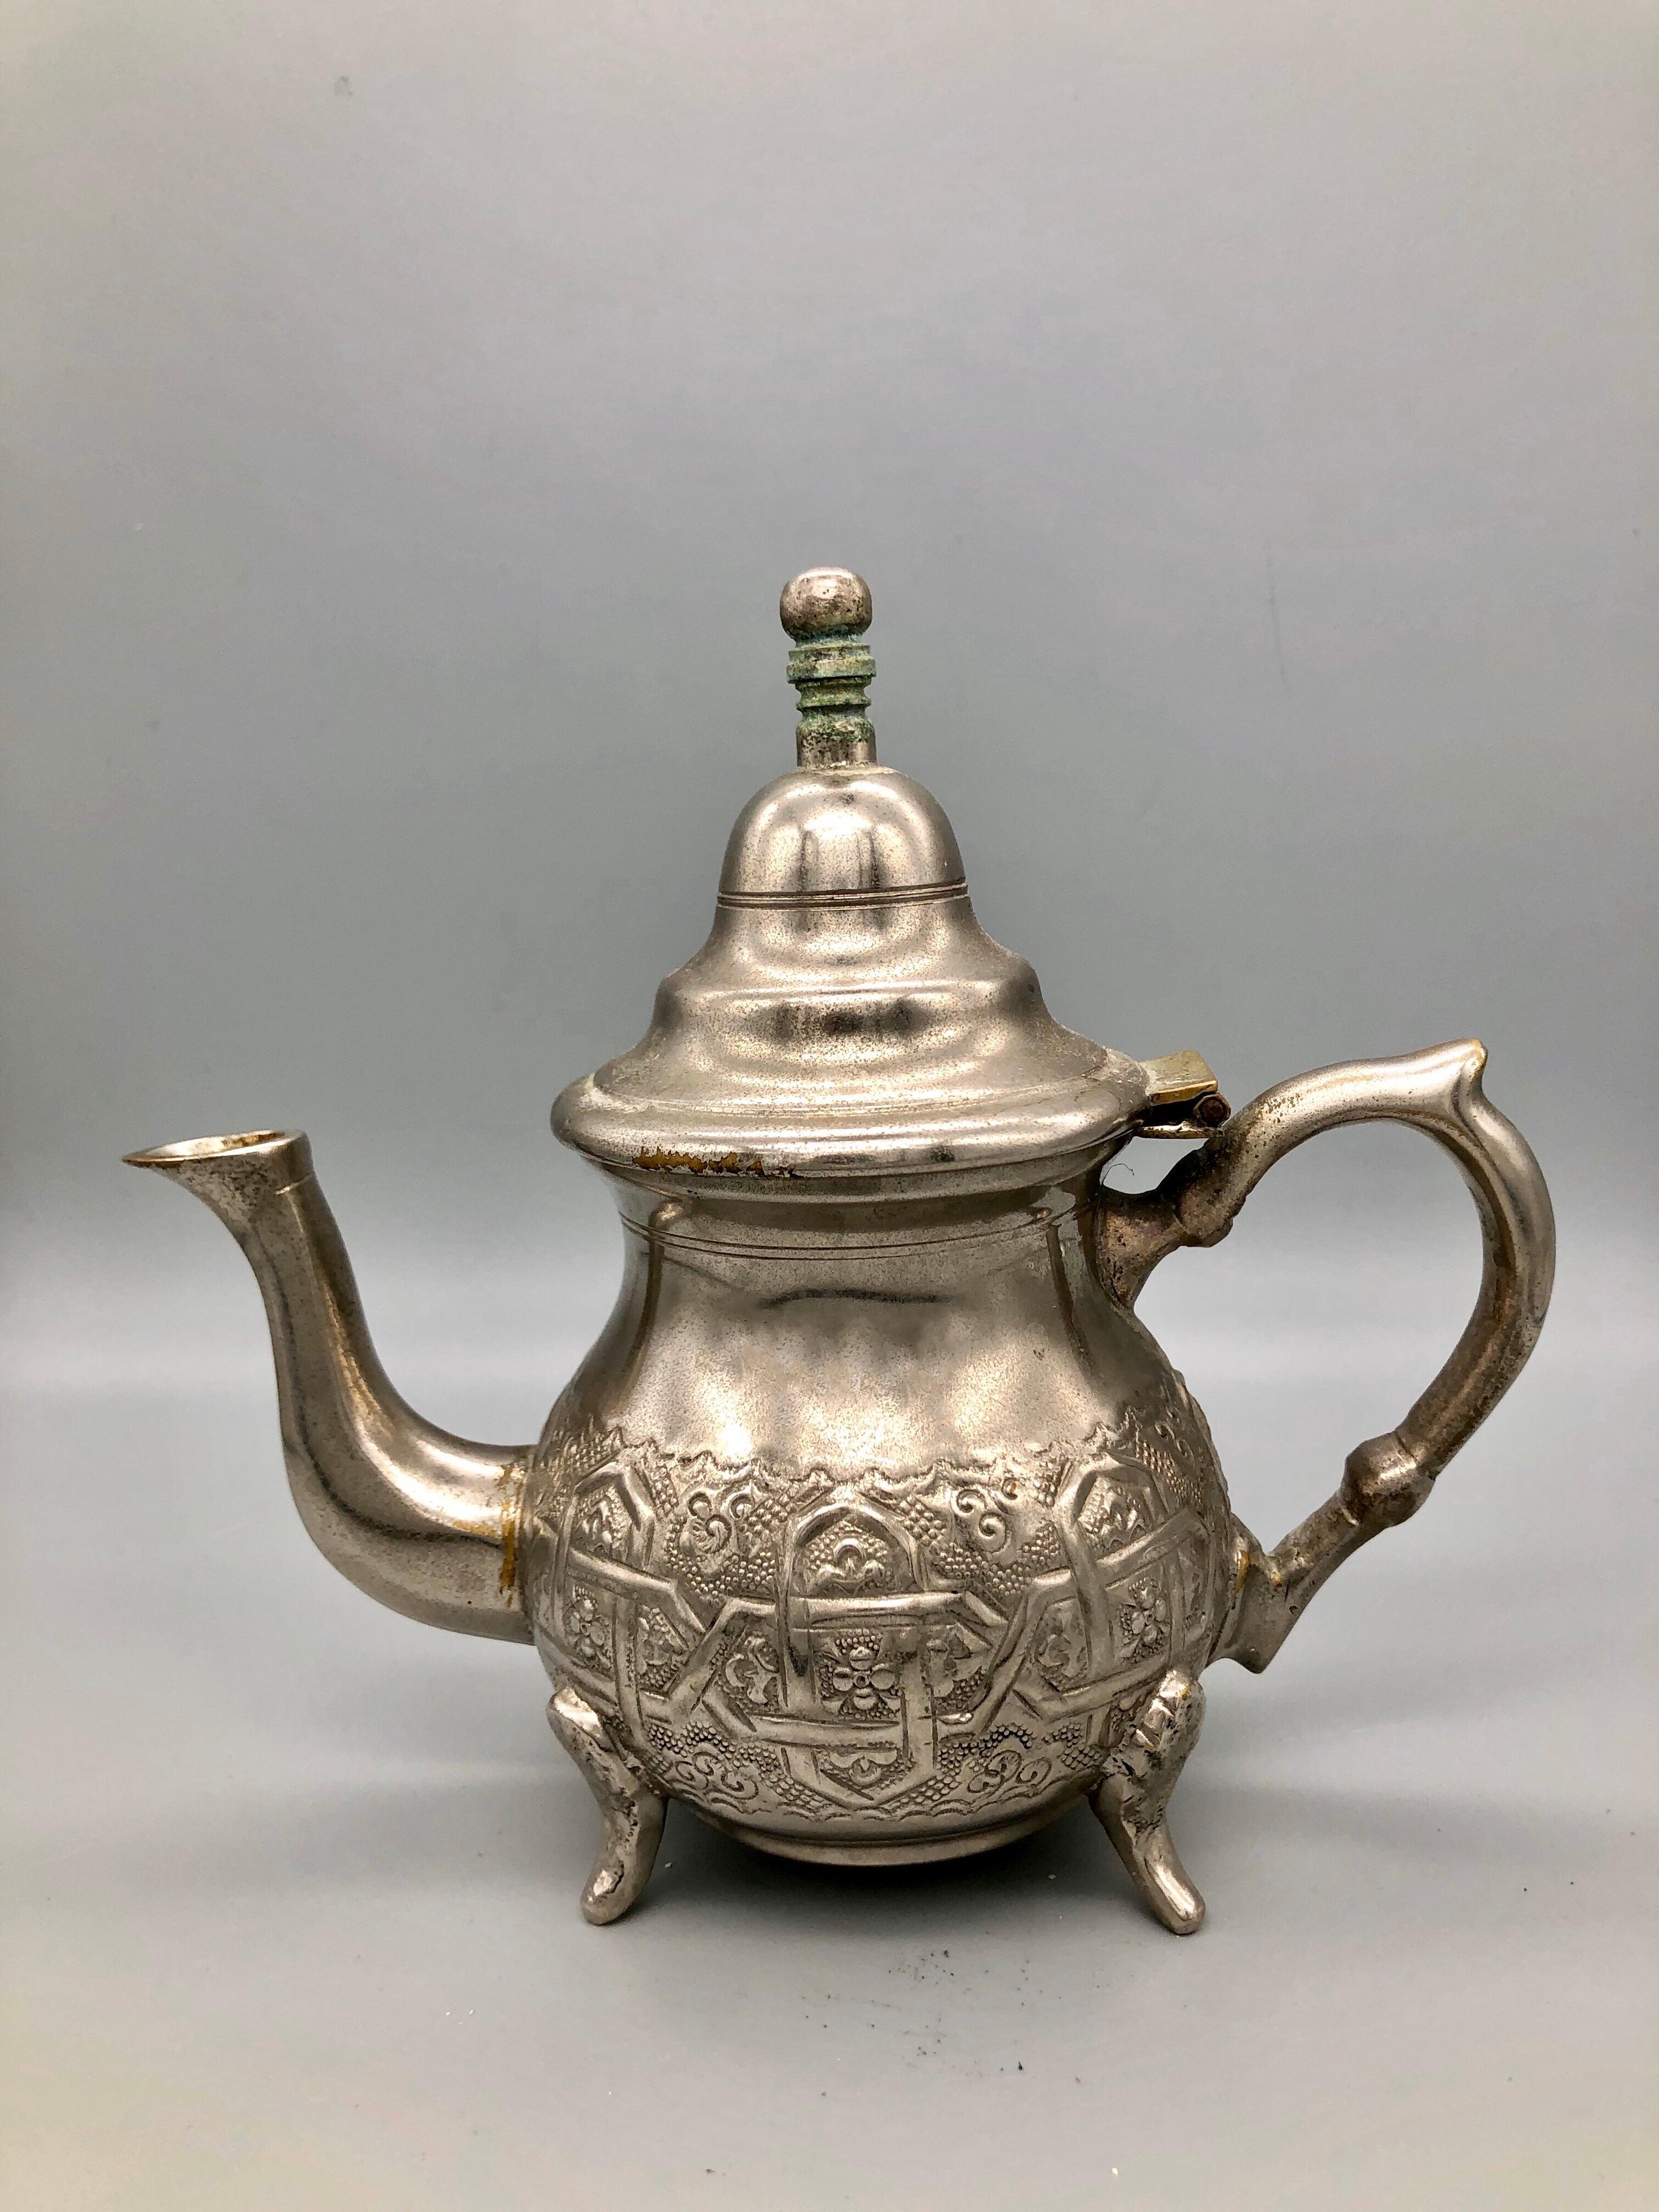 This lovely little silver plated teapot is perfect for a personal pot of Moroccan mint tea. Handmade by the renowned Bennani Frères silversmiths of Fes, Morocco. Intricate repousse geometric design with flowers and spirals, with four claw feet.